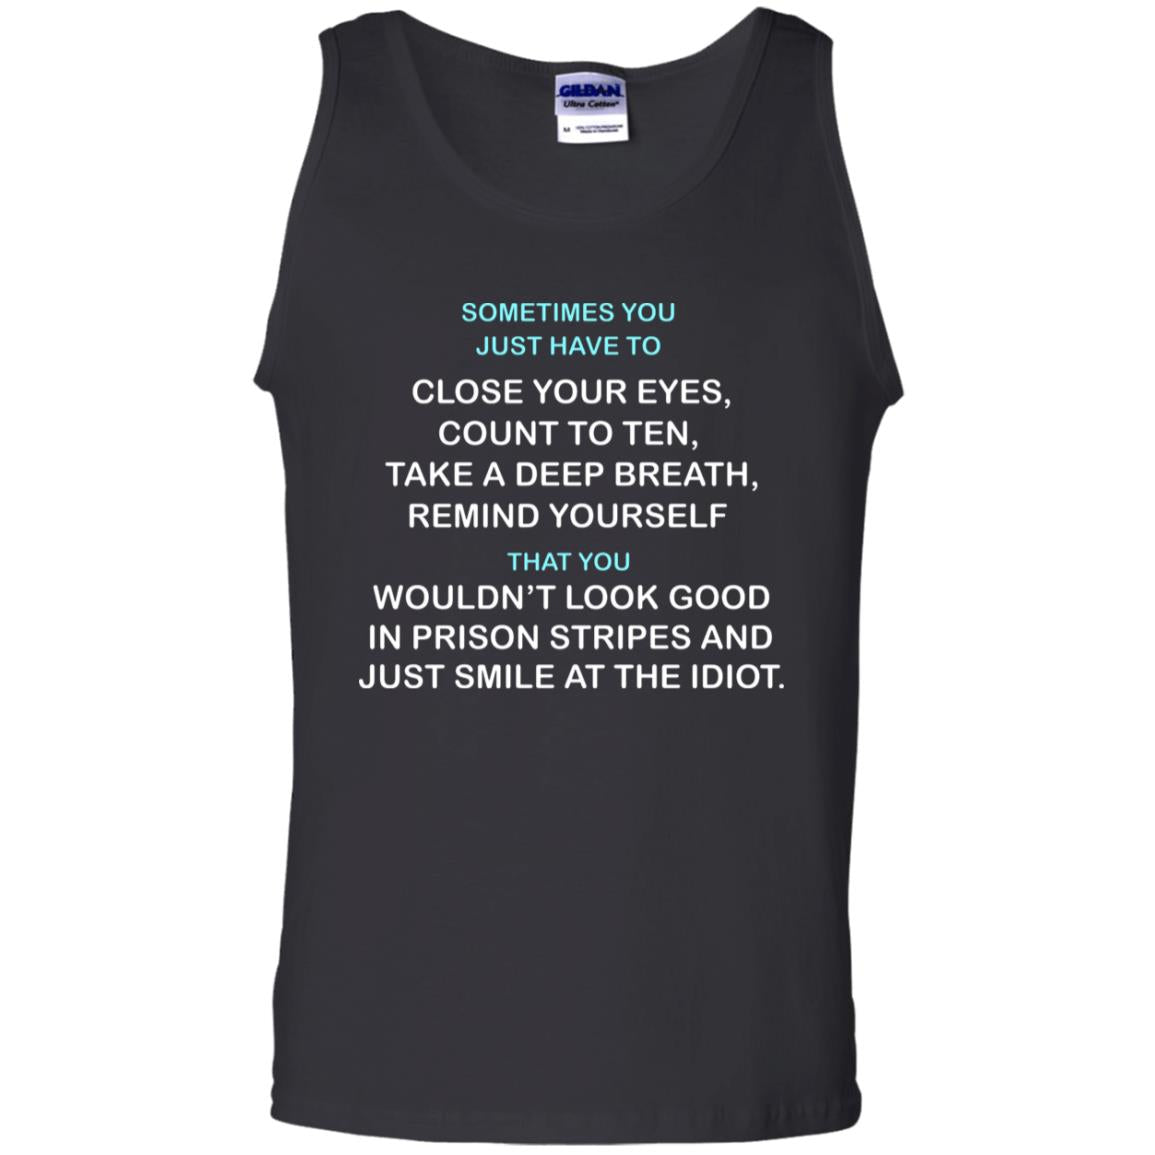 Sometimes You Just Have To Close Your Eyes Count To Ten Take A Deep Breath  Remind Yourself  That You Wouldn't Look Good In Prison Stripes And Just Smile At The IdiotG220 Gildan 100% Cotton Tank Top